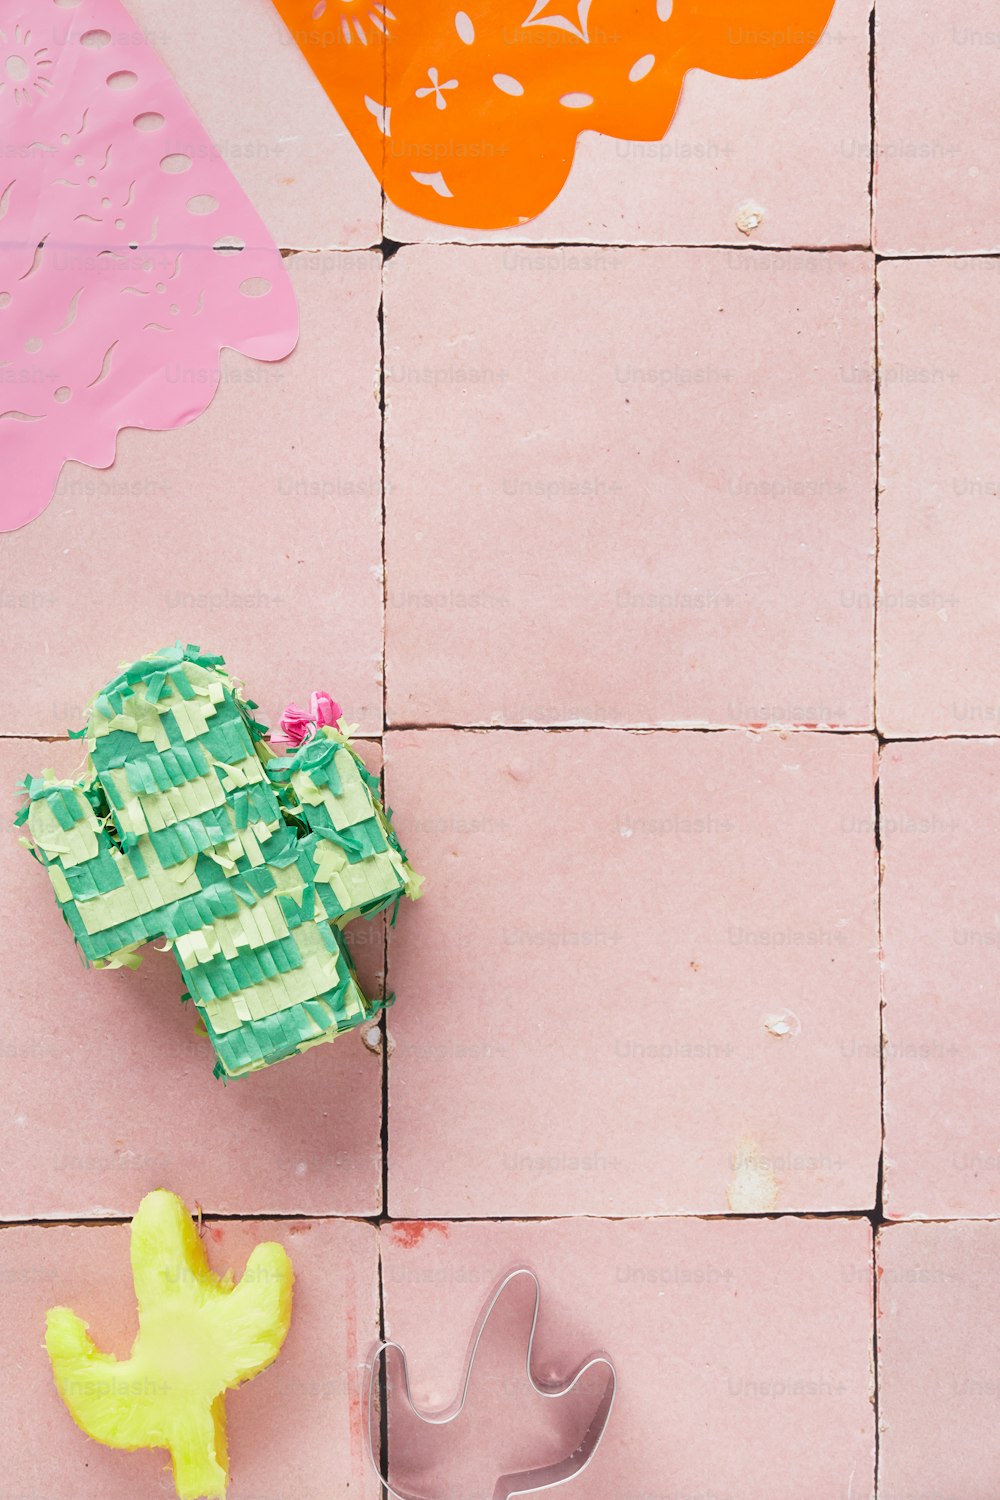 a pink tiled floor with a cactus and a cake cutter